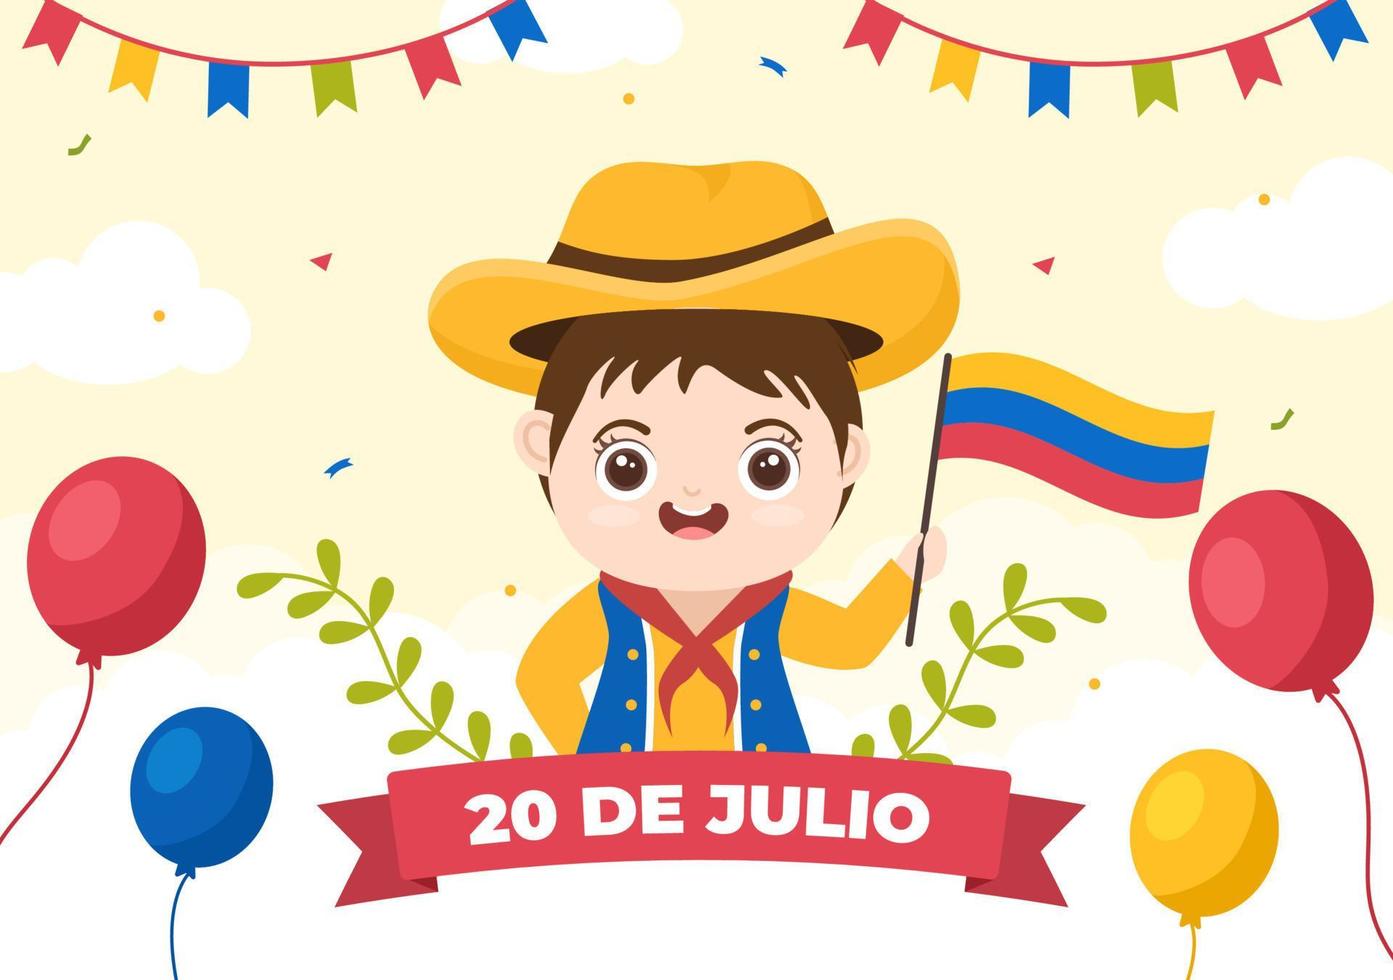 20 De Julio independencia De Colombia Cartoon Illustration with Flags, Balloons and Cute Kids People Characters for Poster Design vector